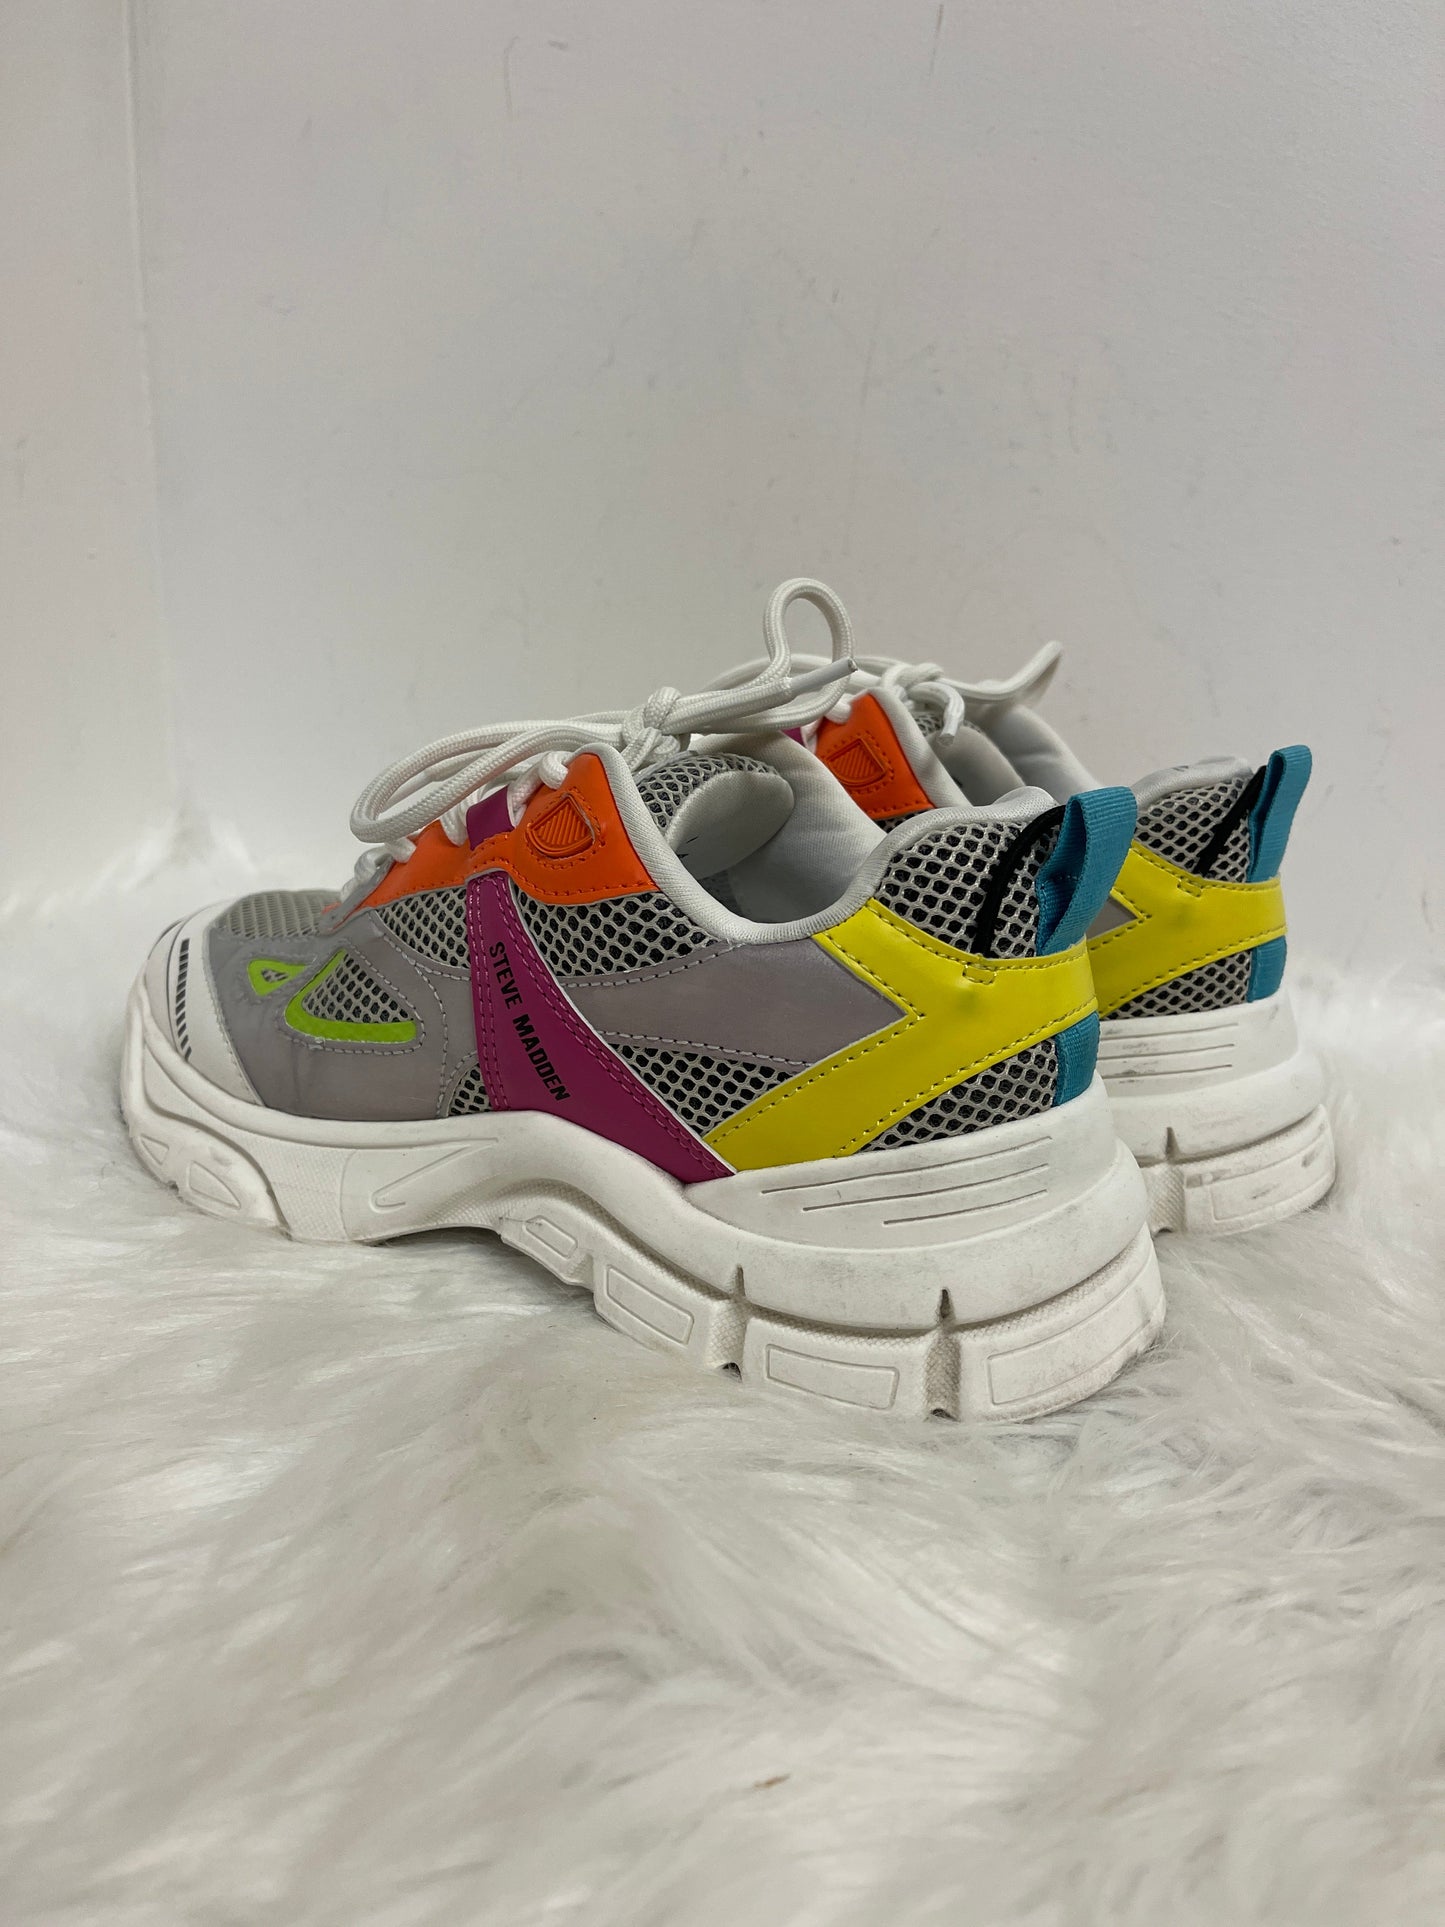 Multi-colored Shoes Sneakers Steve Madden, Size 8.5